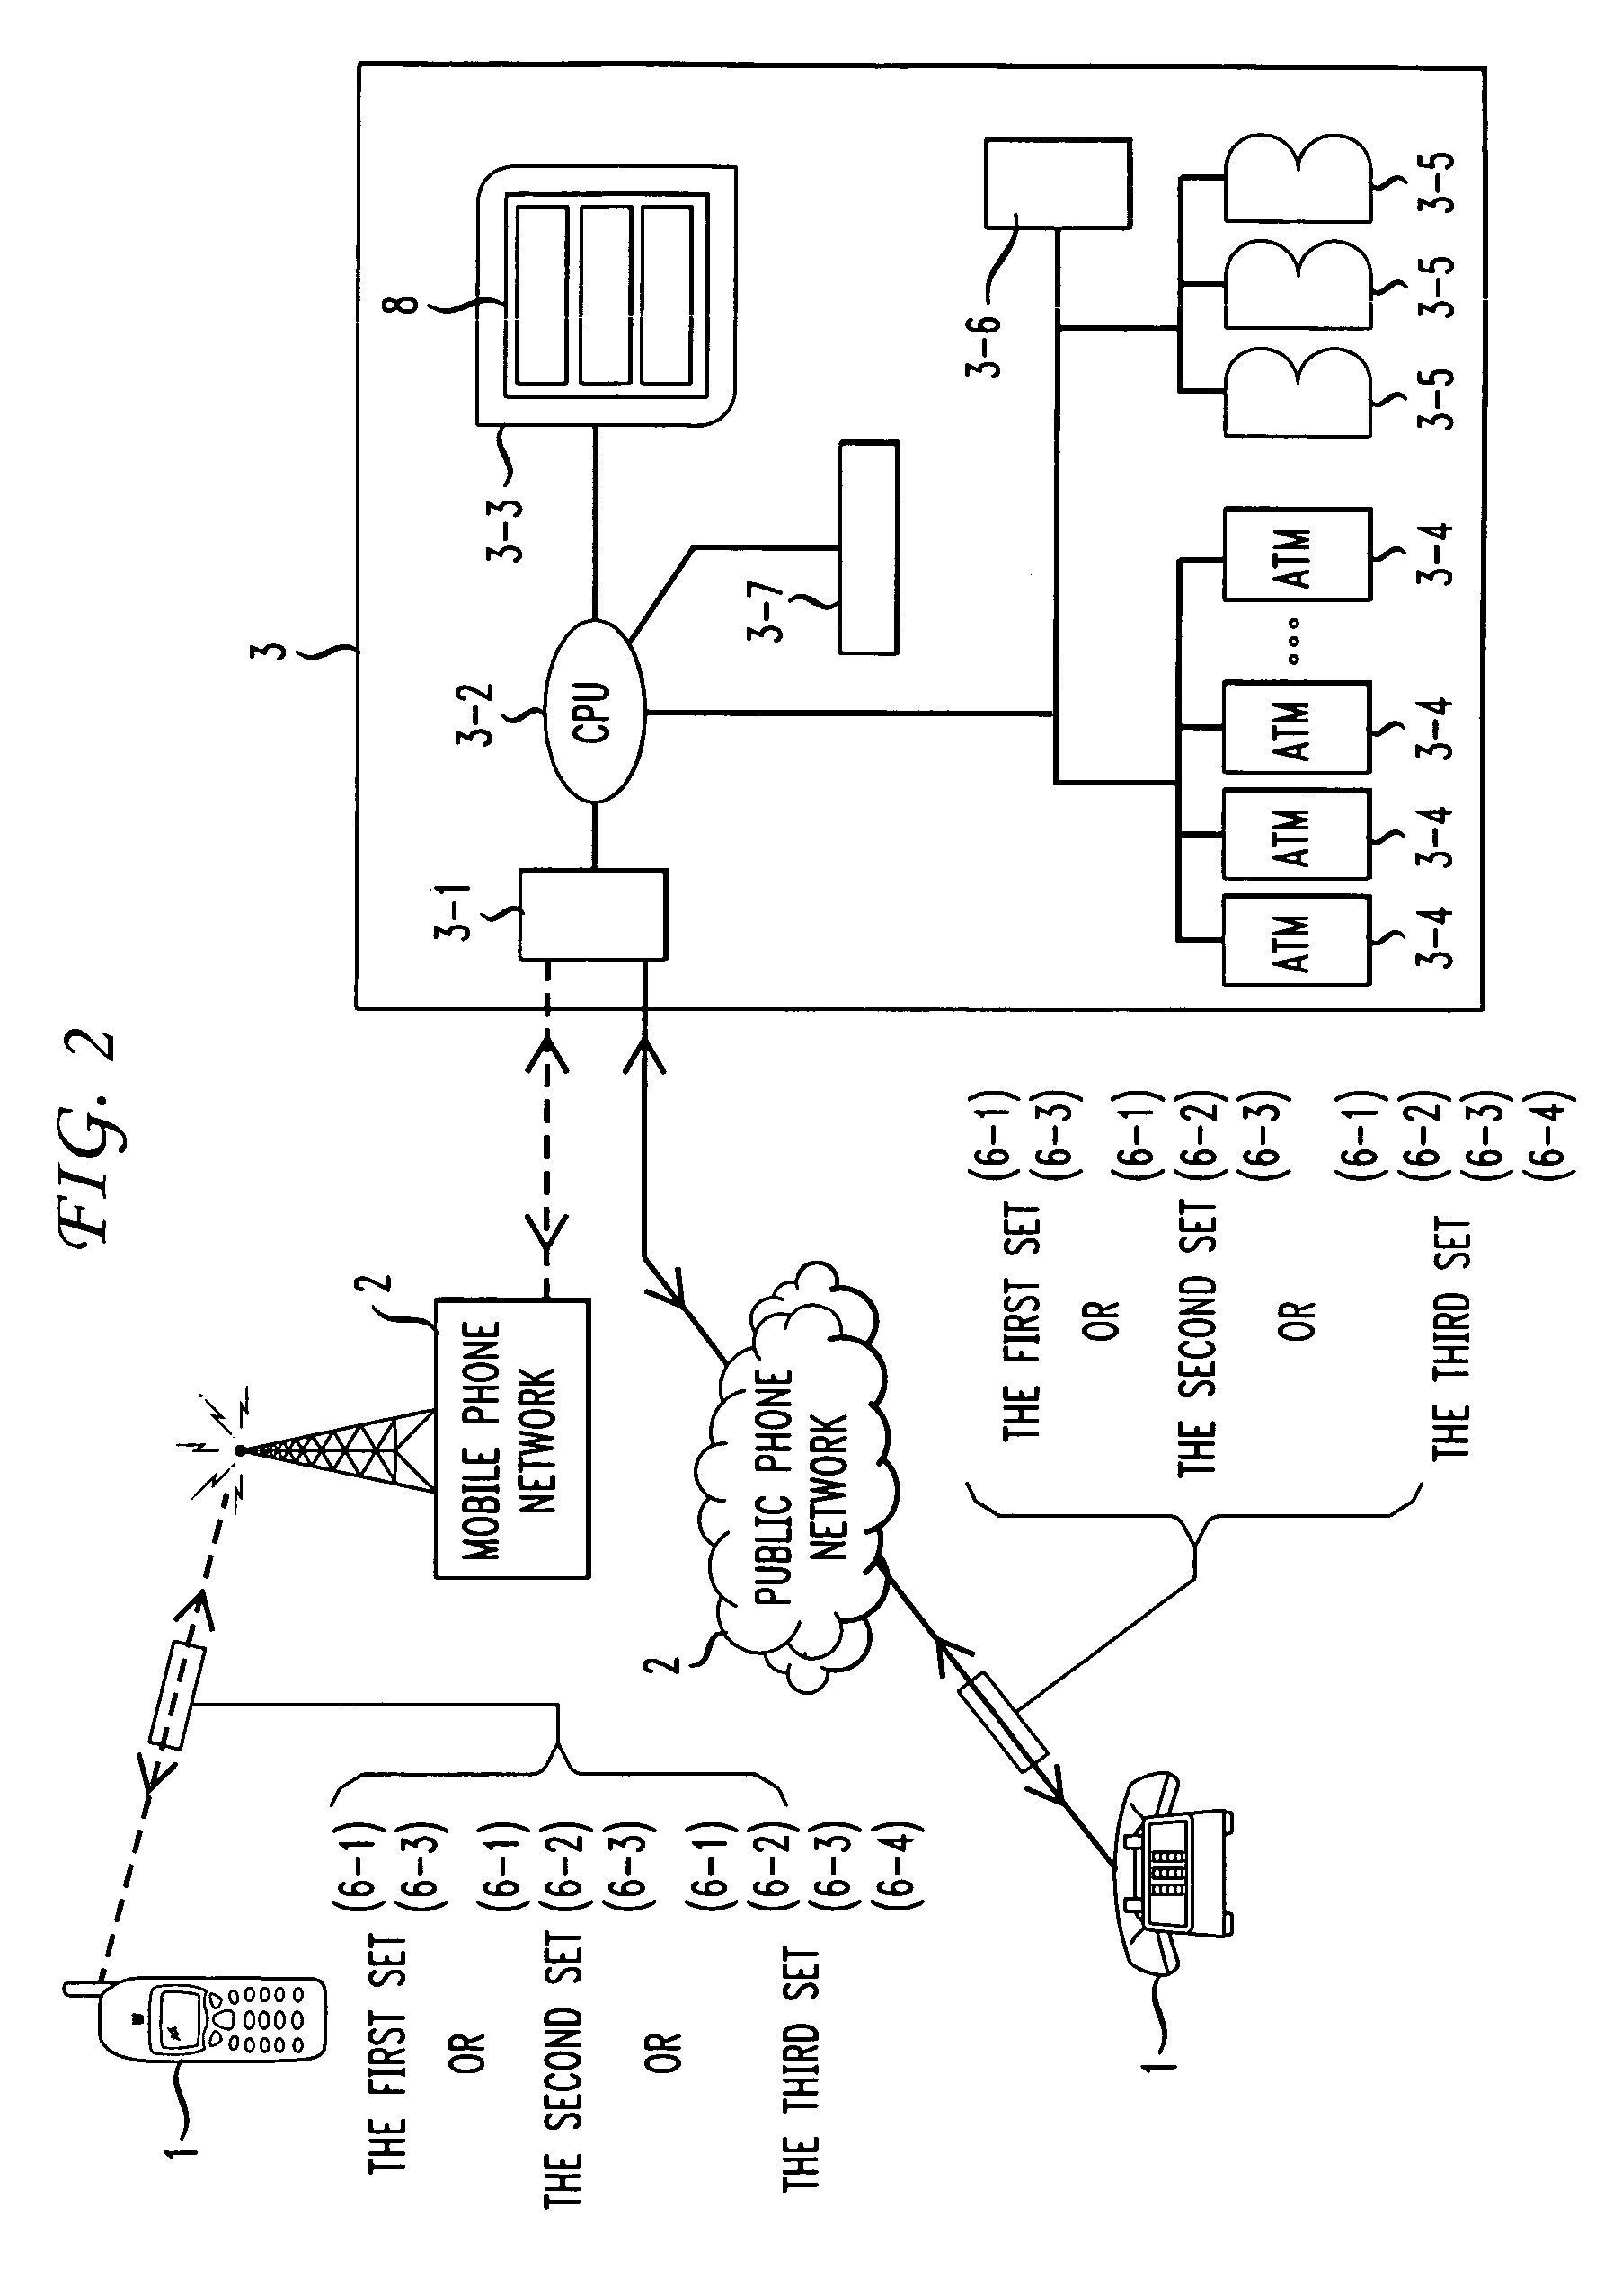 Banking computer account system with lock for secure payment via telephone